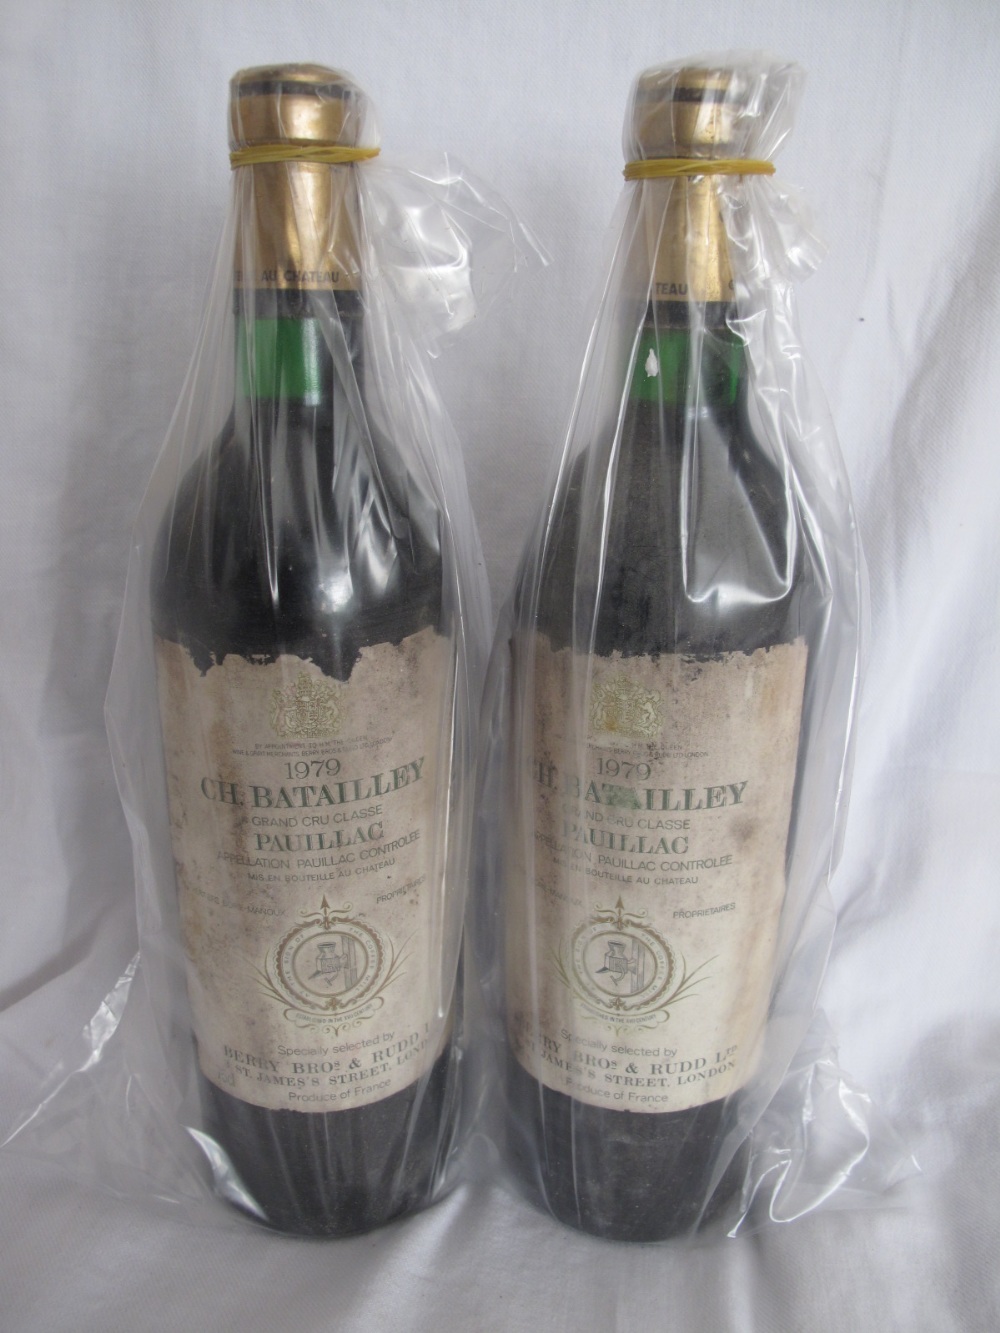 Two bottles Ch. Batailley 1979 Grand Cru Classe, ullage above bottom of neck